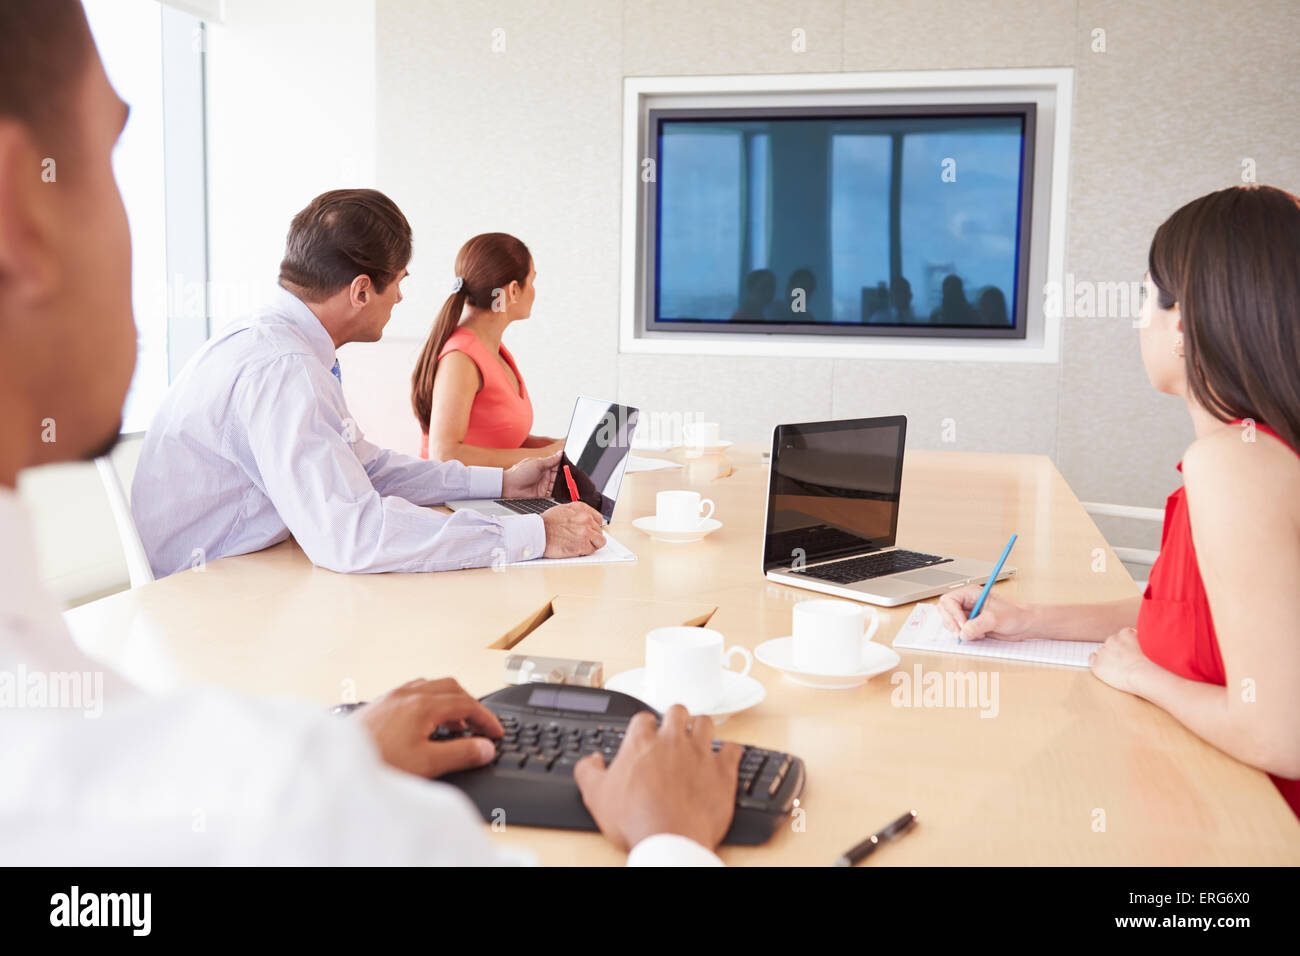 Four Businesspeople Having Video Conference In Boardroom Stock Photo